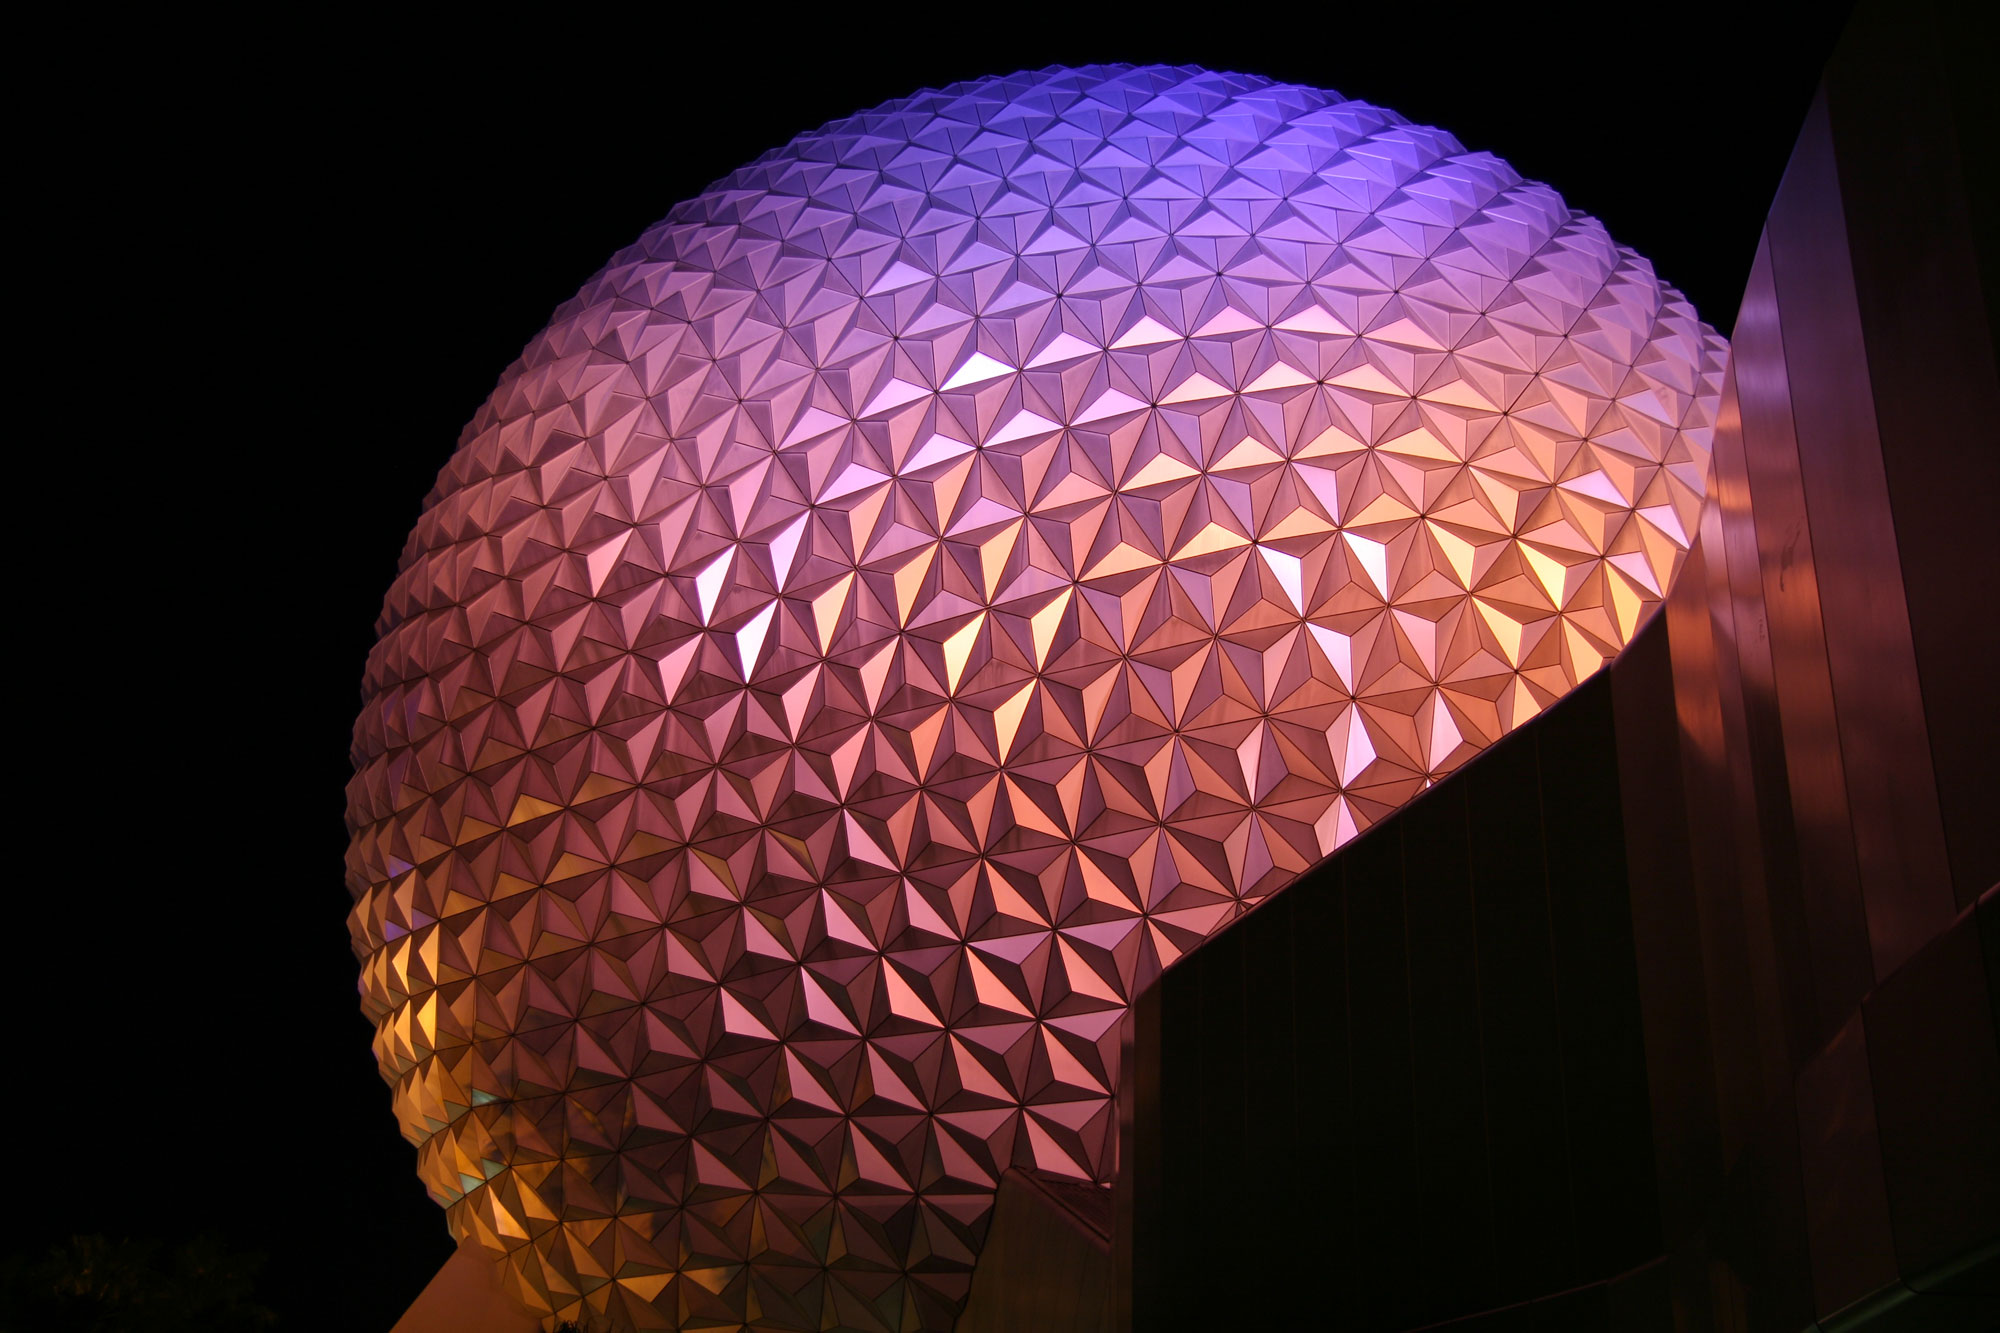 Spaceship Earth with reflection at night